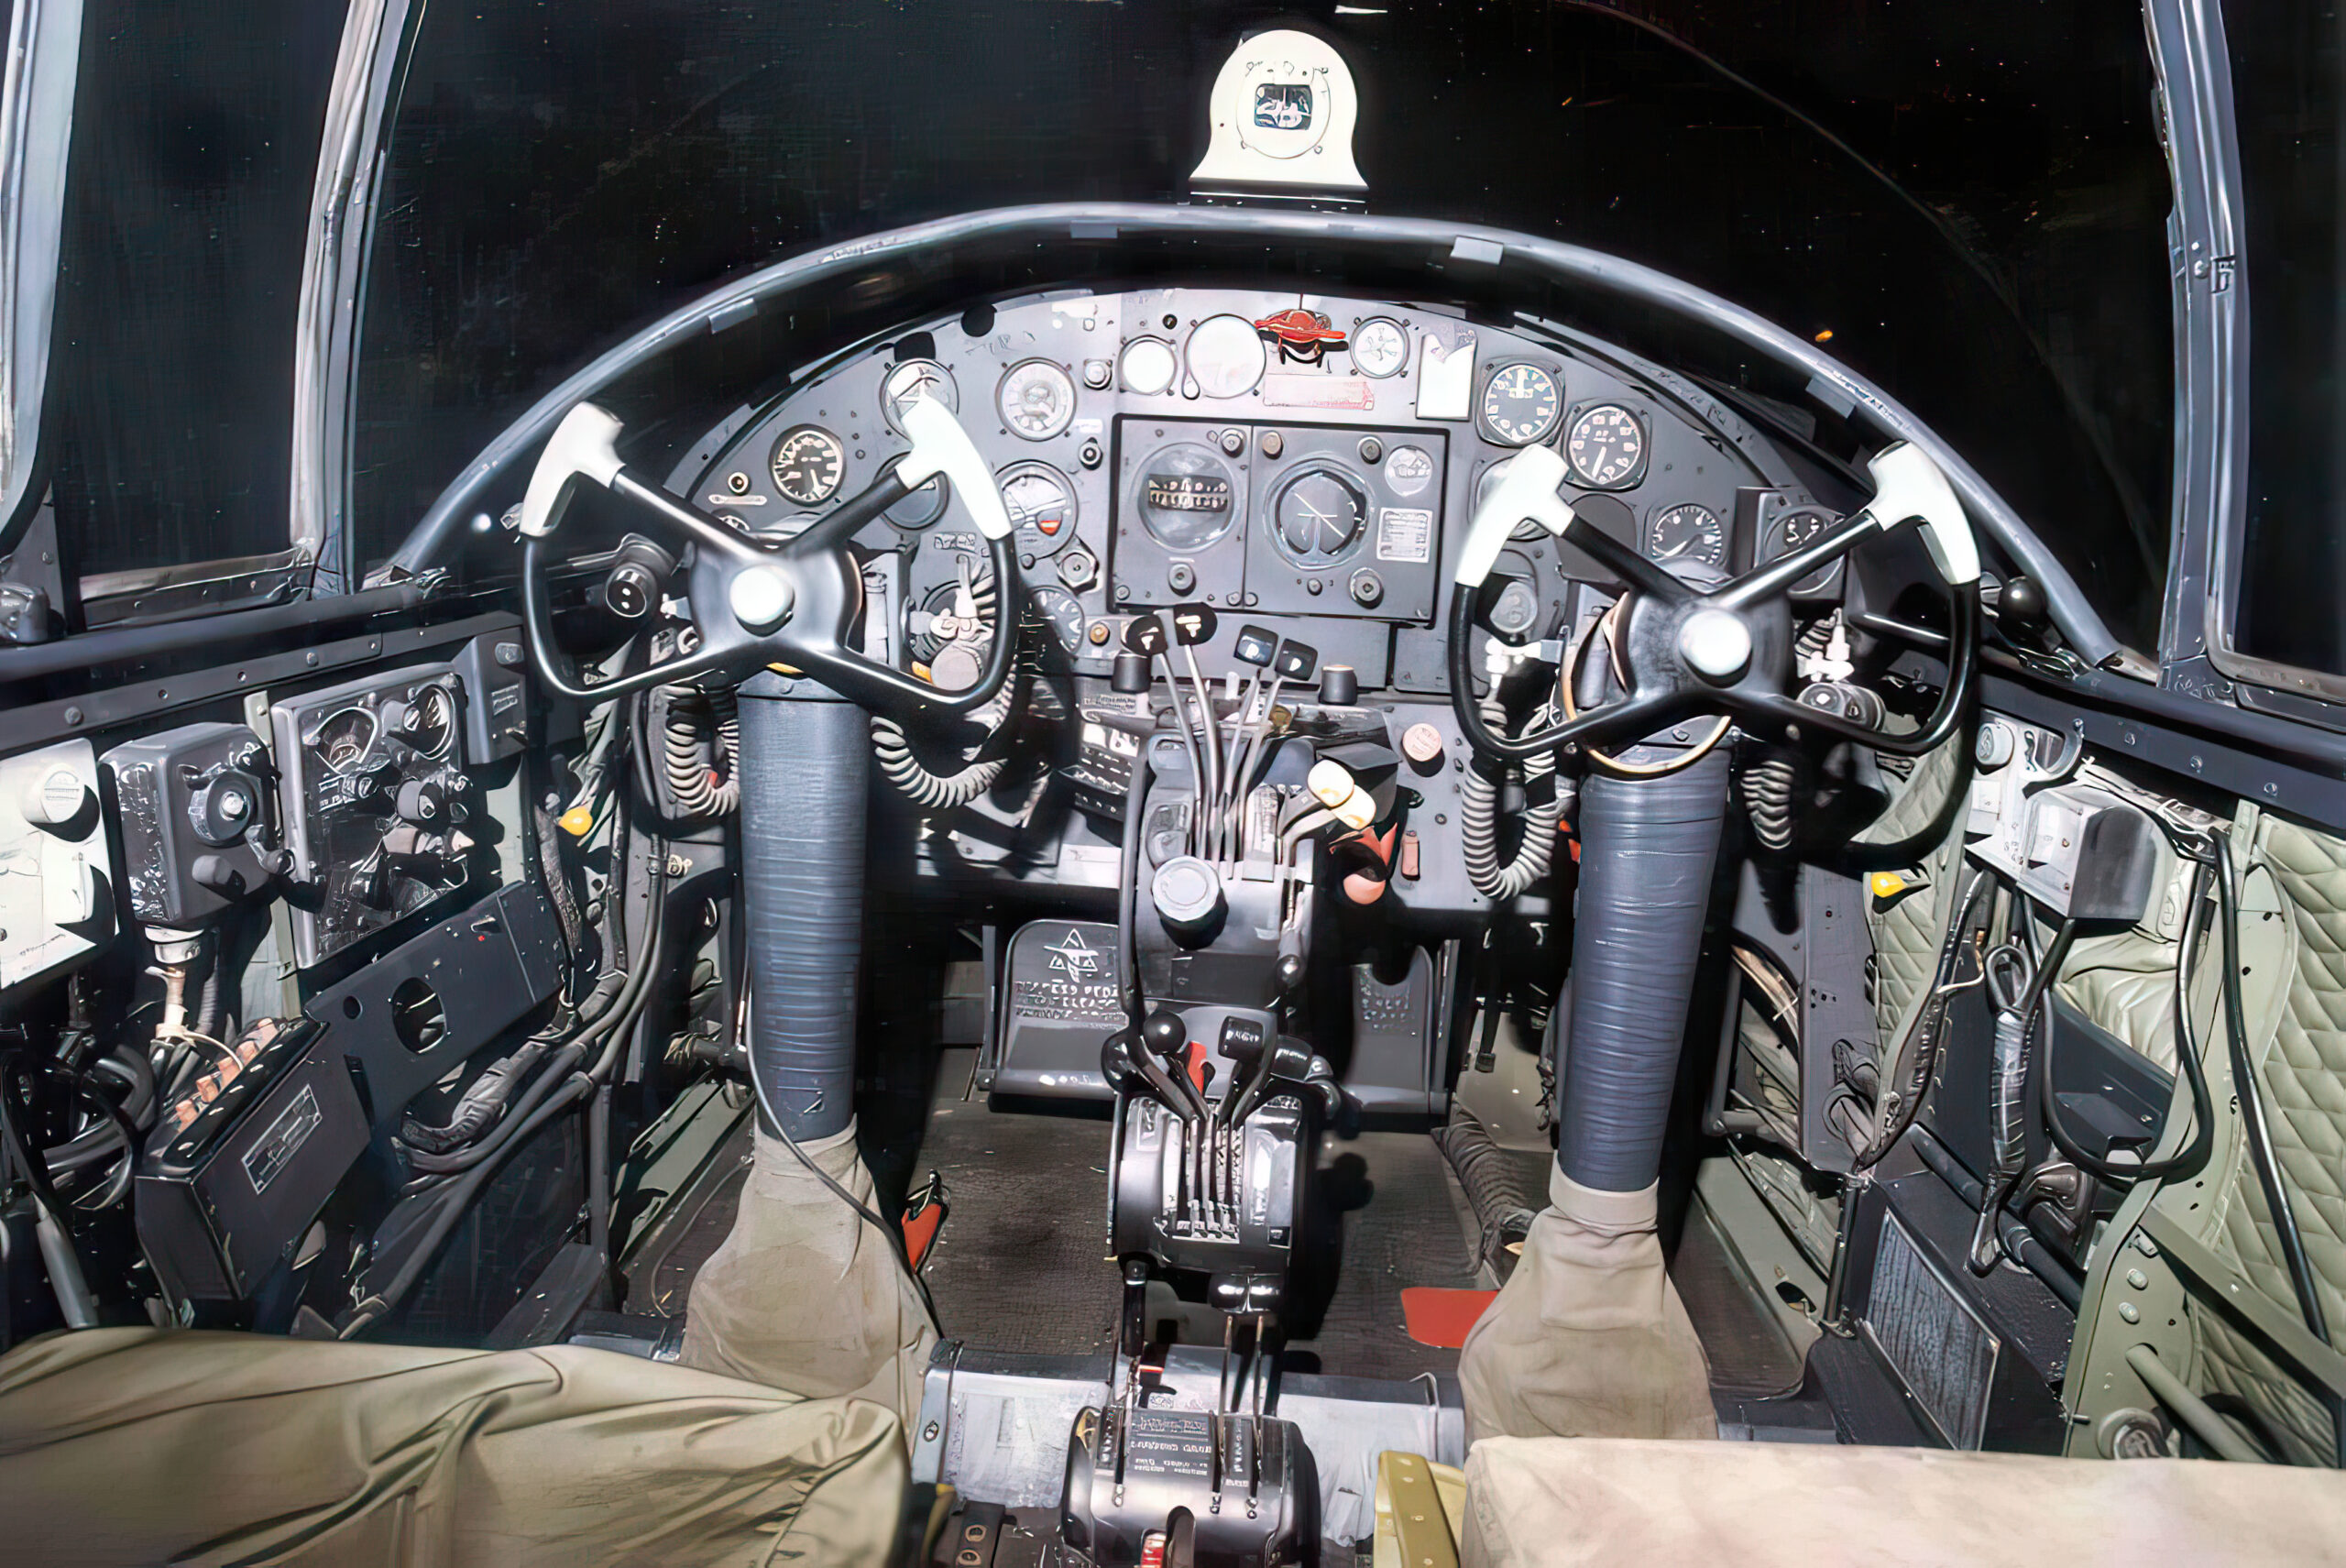 North American B-25B Mitchell cockpit at the National Museum of the U.S. Air Force. (U.S. Air Force photo)